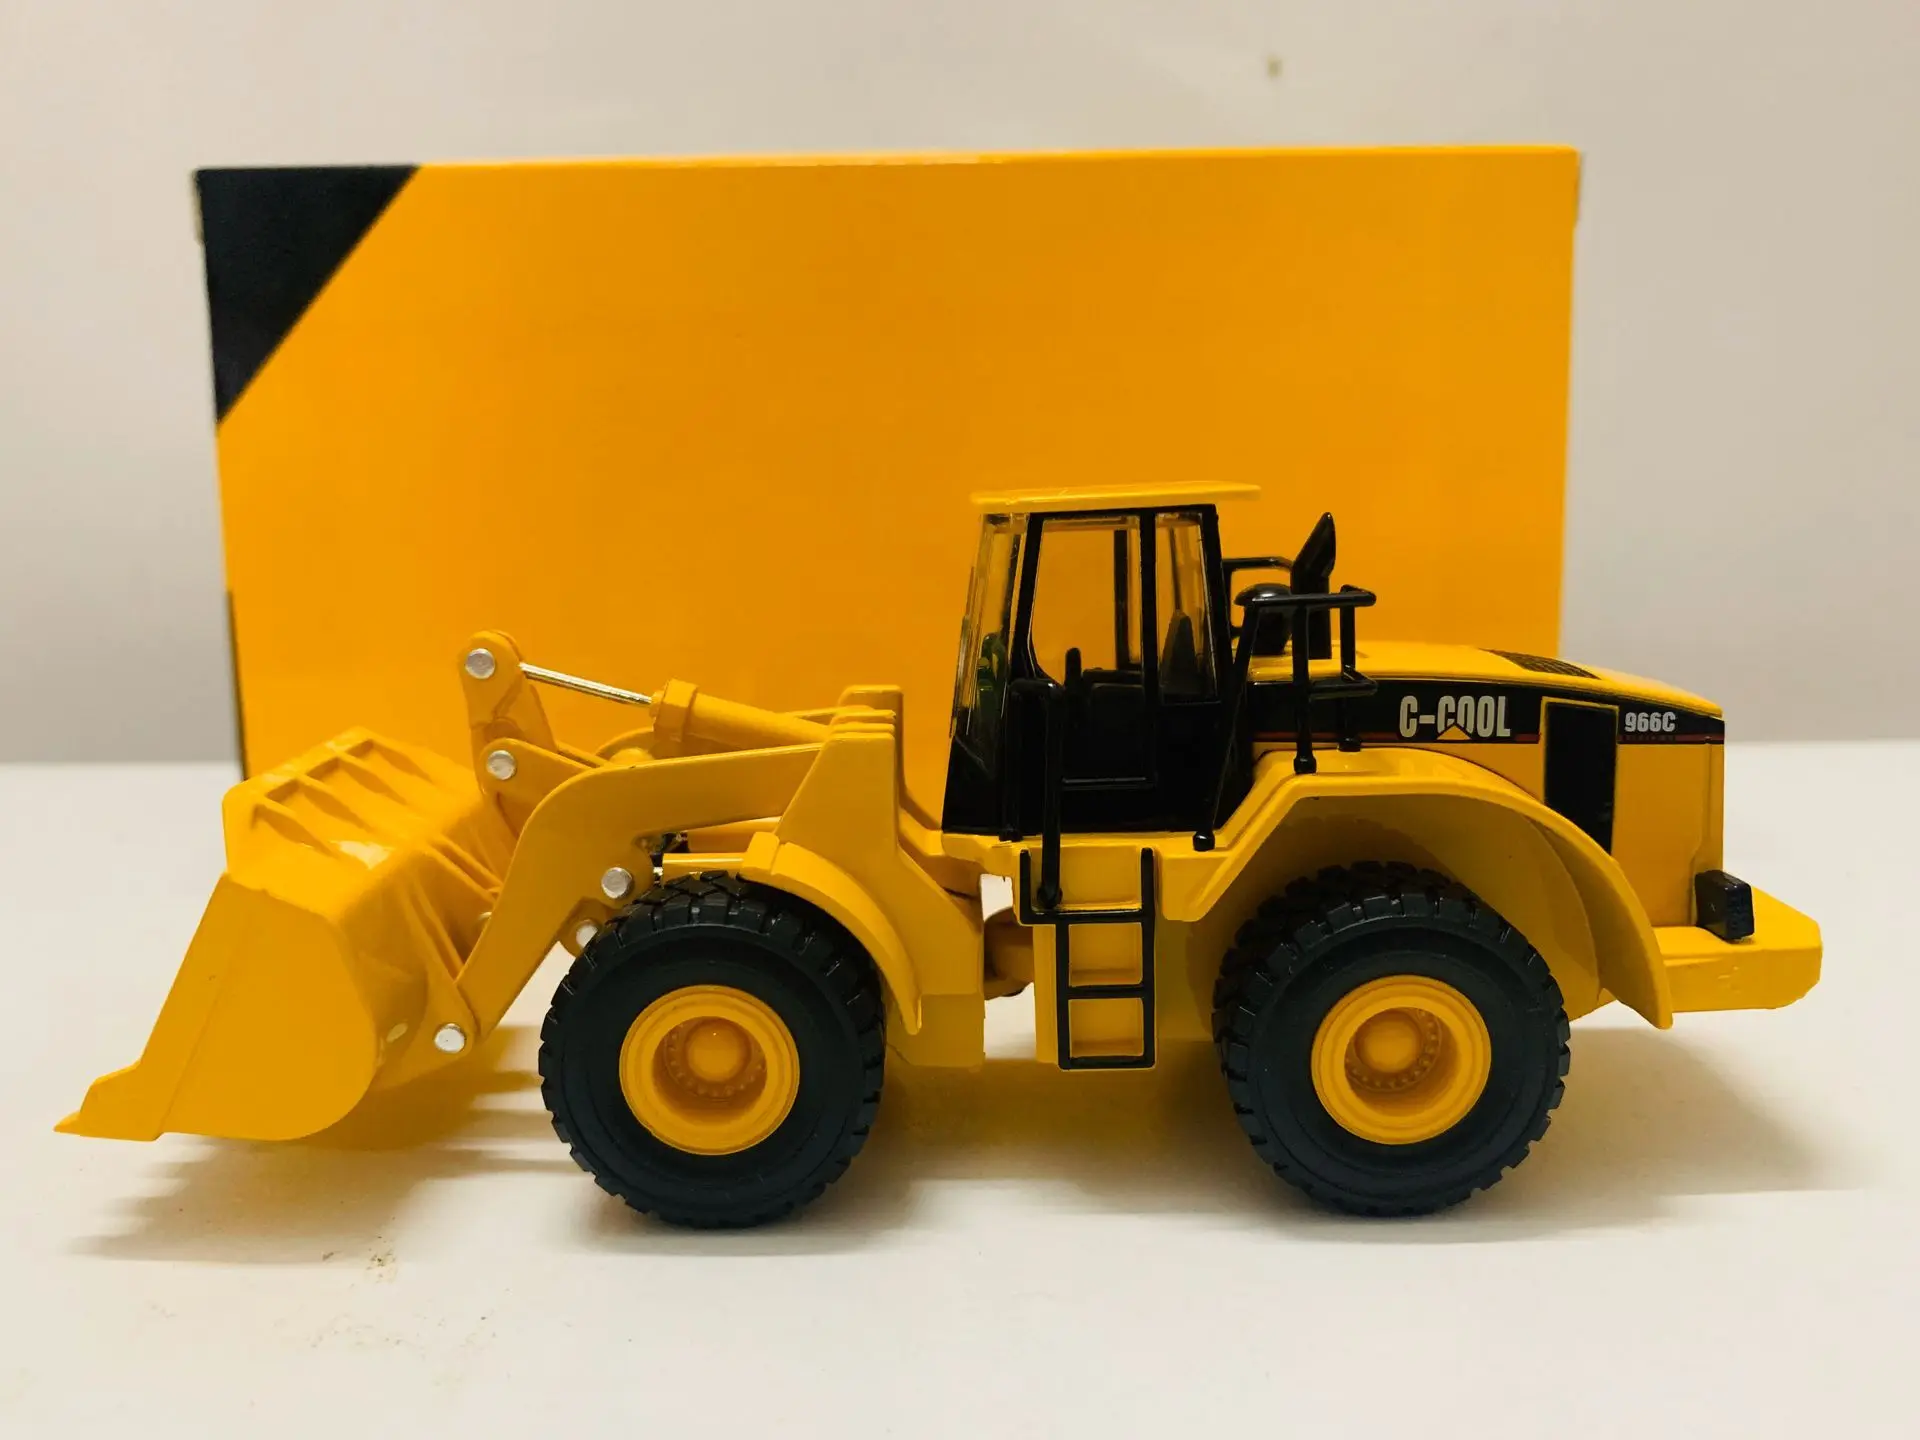 1/64 Scale DieCast Model - Construction Vehicles - Wheel Loader - C-COOL Model